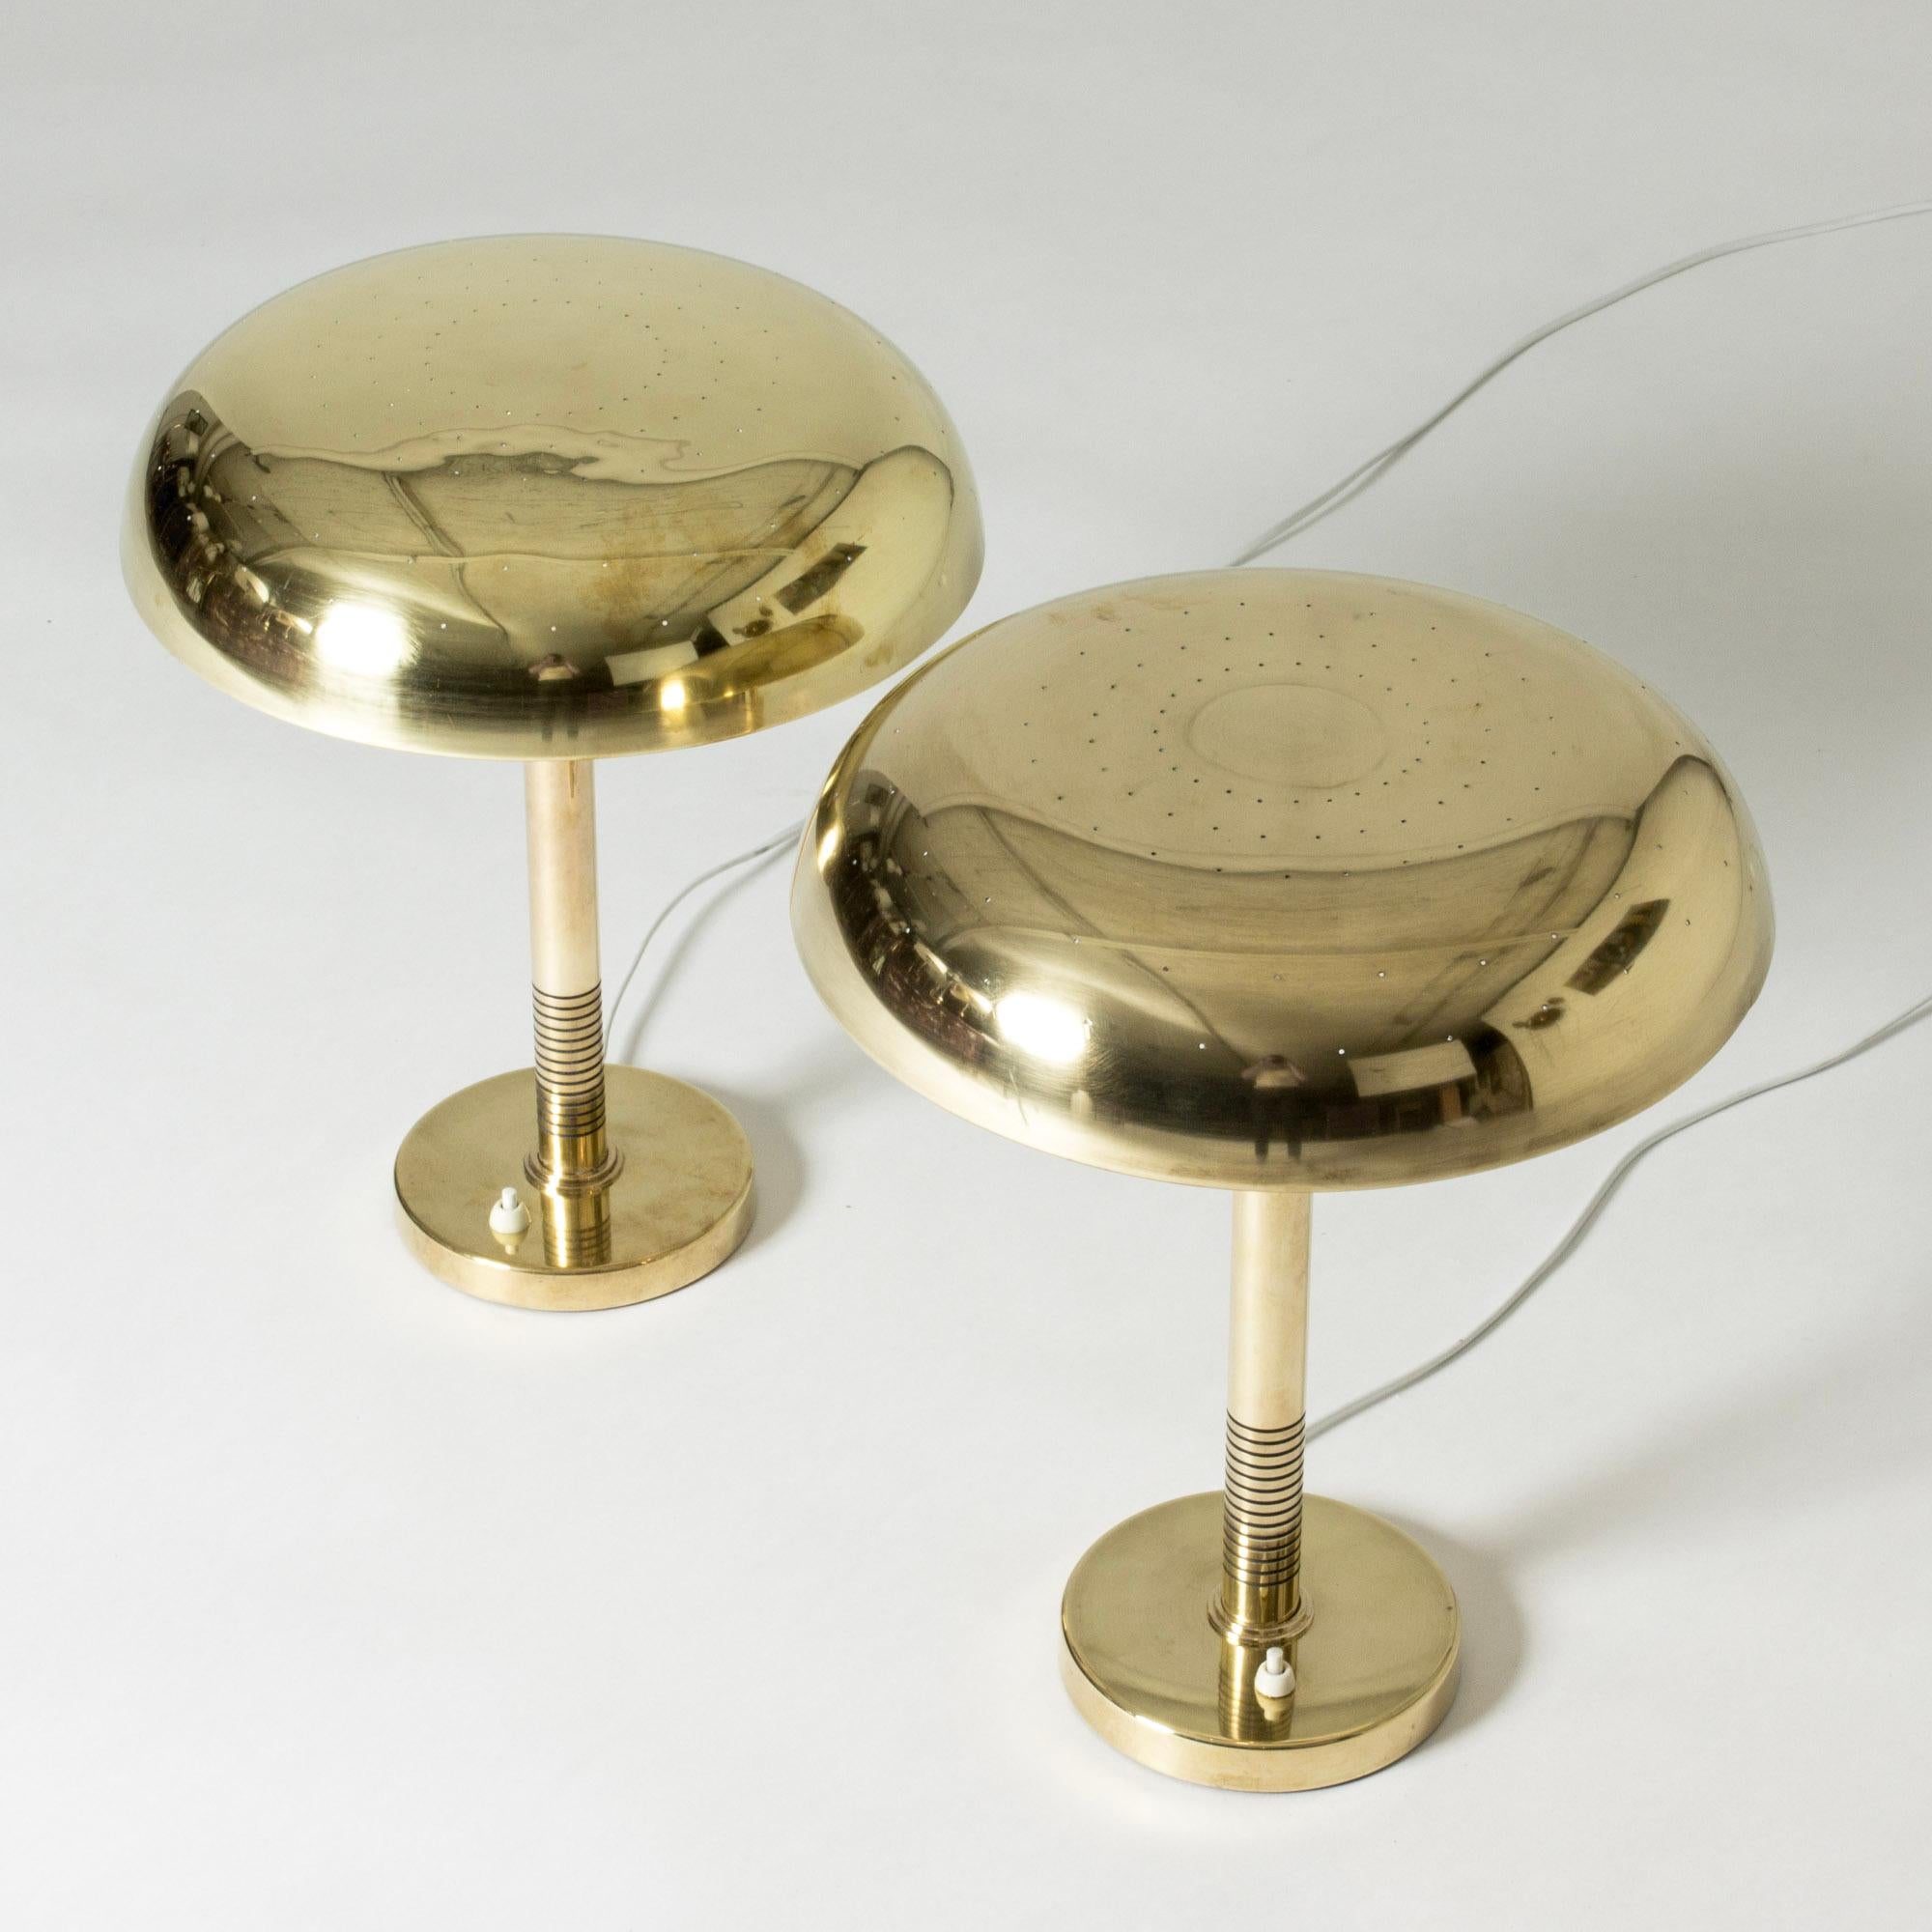 Midcentury Modern Brass Table Lamps, Boréns, Sweden, 1950s In Good Condition For Sale In Stockholm, SE